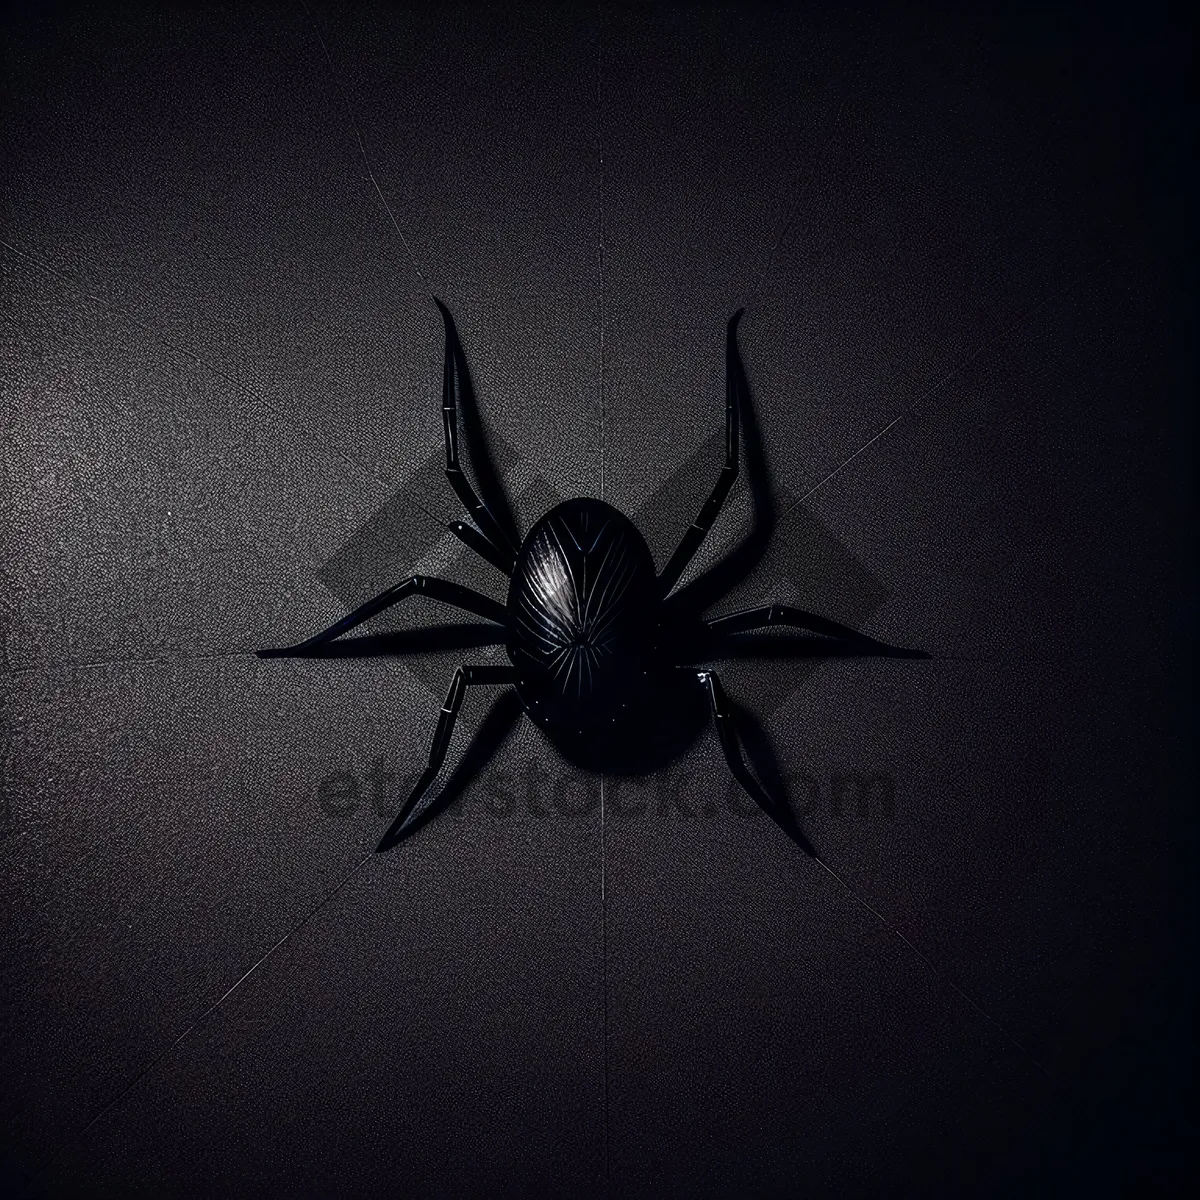 Picture of Black Widow Spider in Close-up on Web